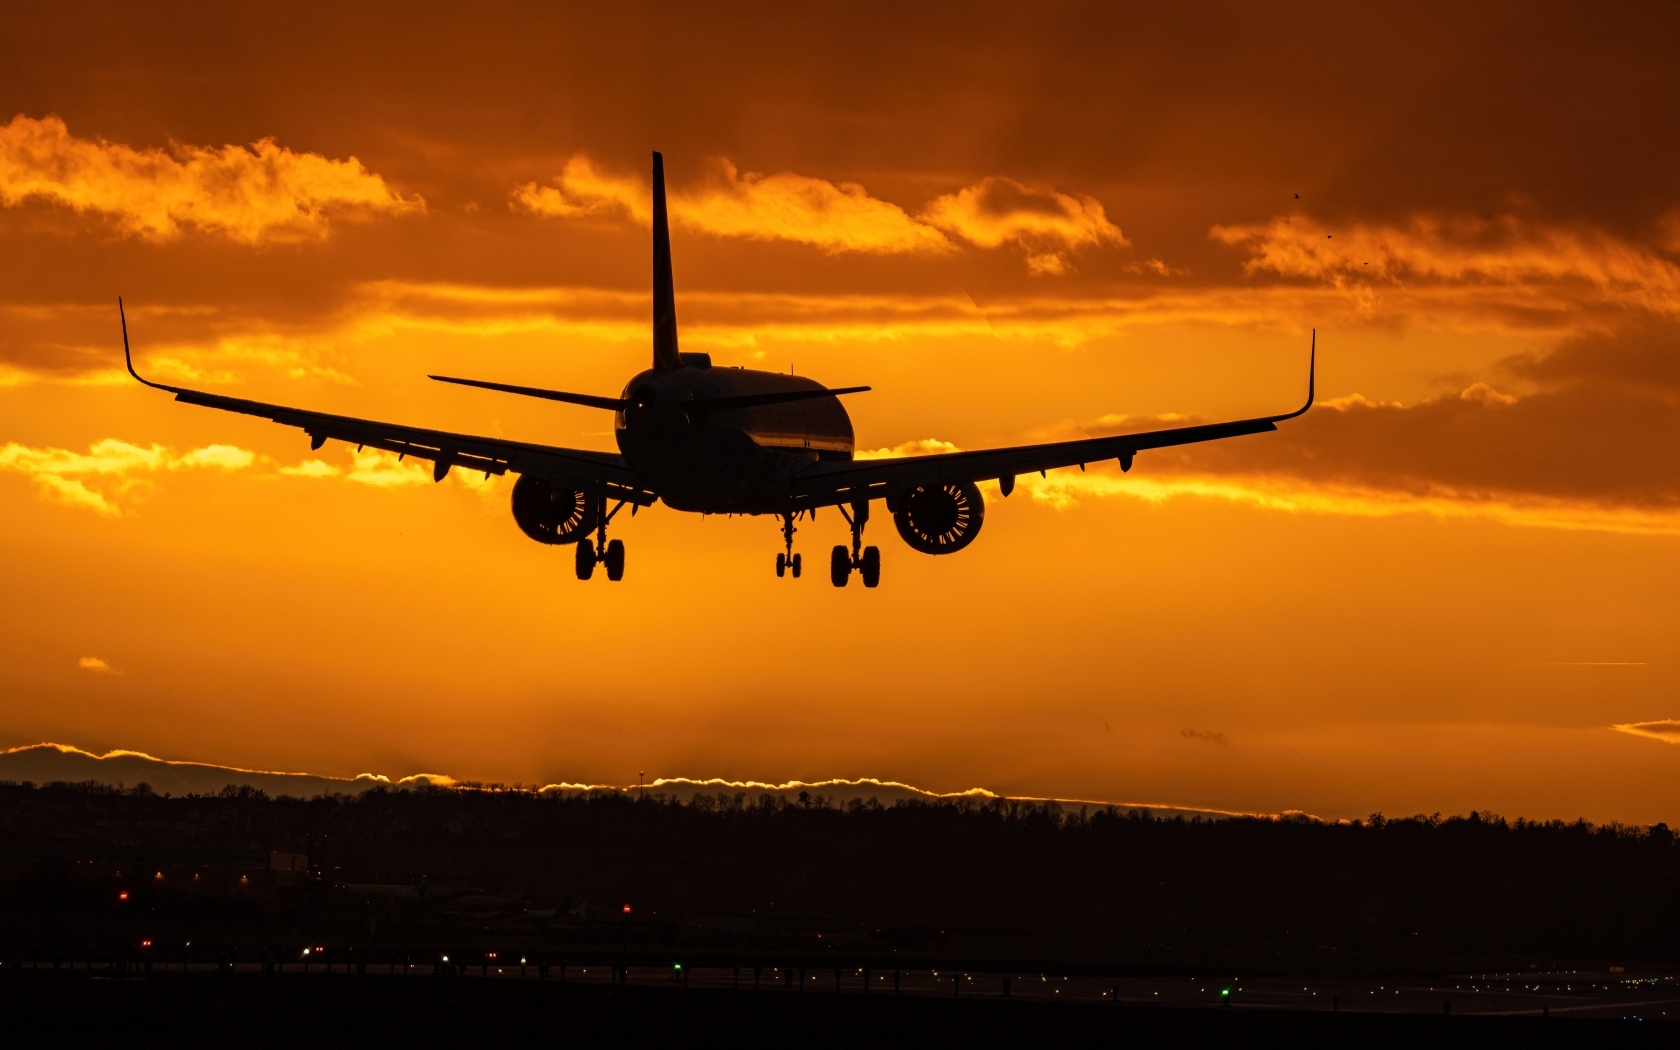 The plane is landing at sunset